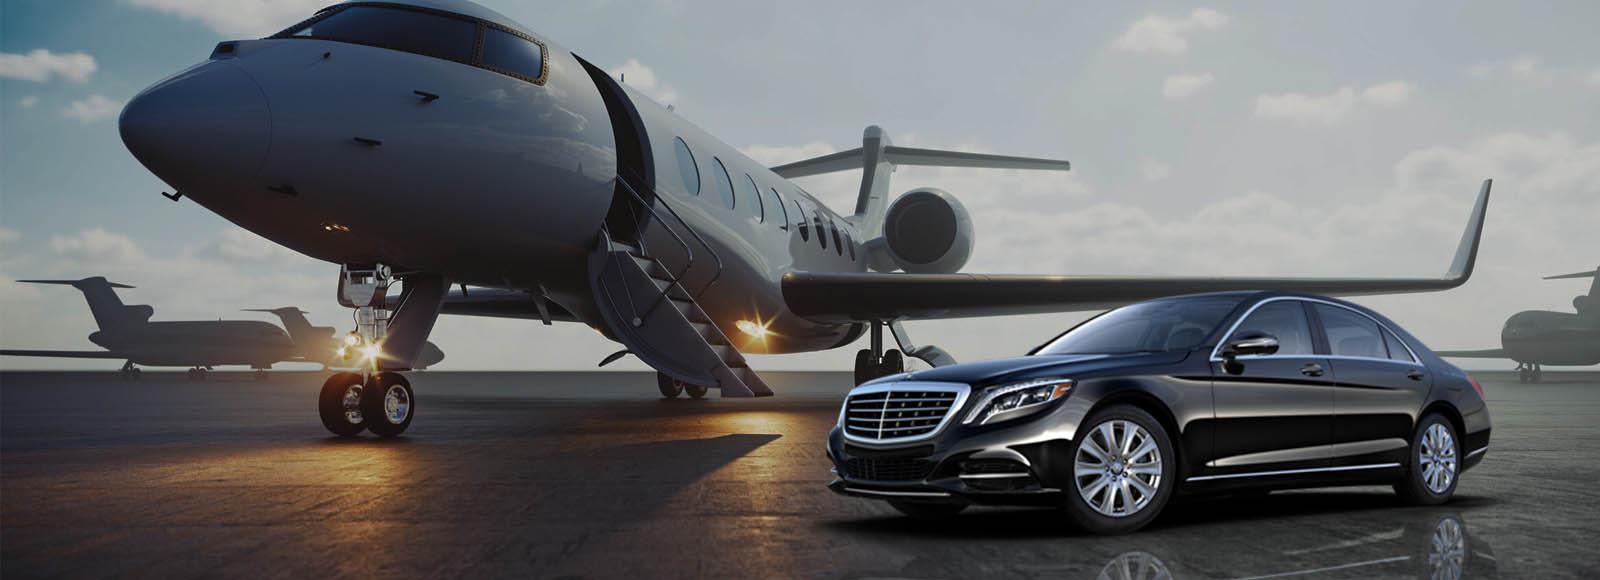 Contact us for limousine services in New Jersey